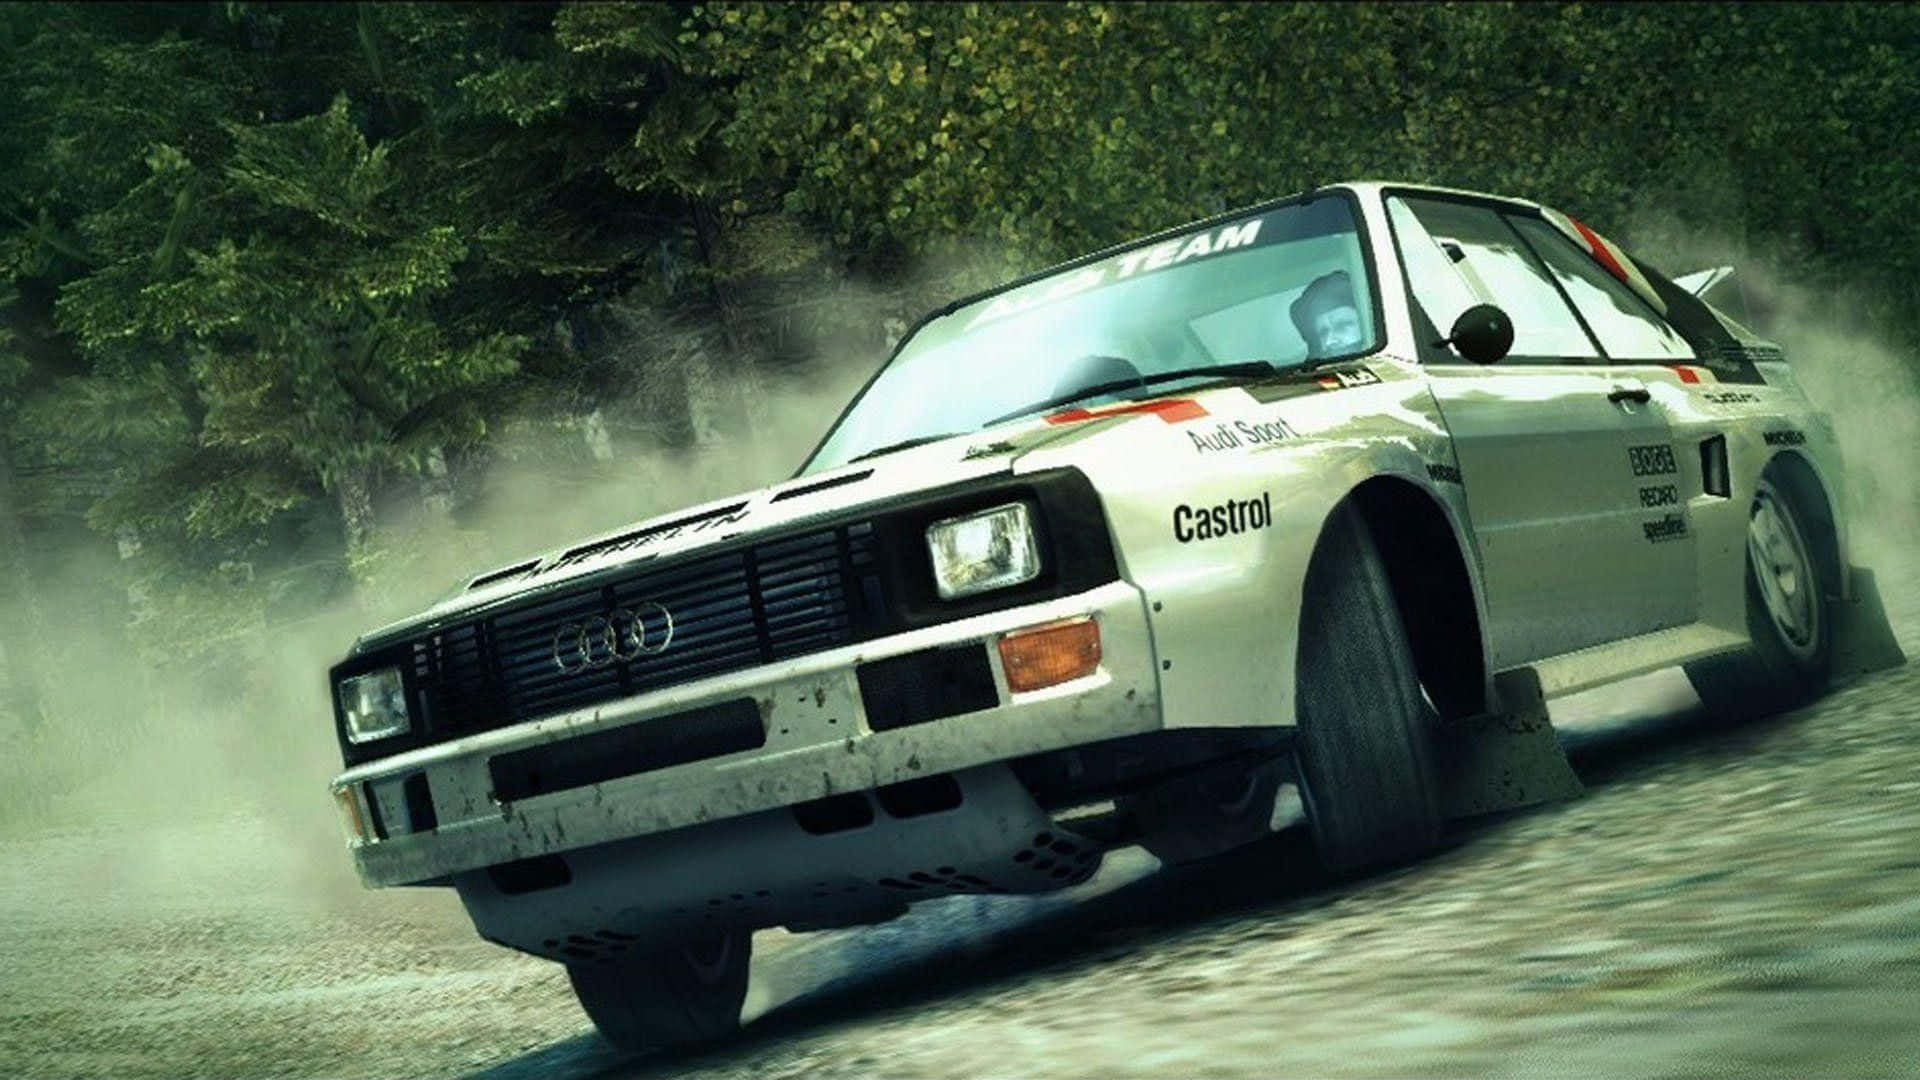 Feel the rush of adrenaline with the high-octane racing game Dirt 3.